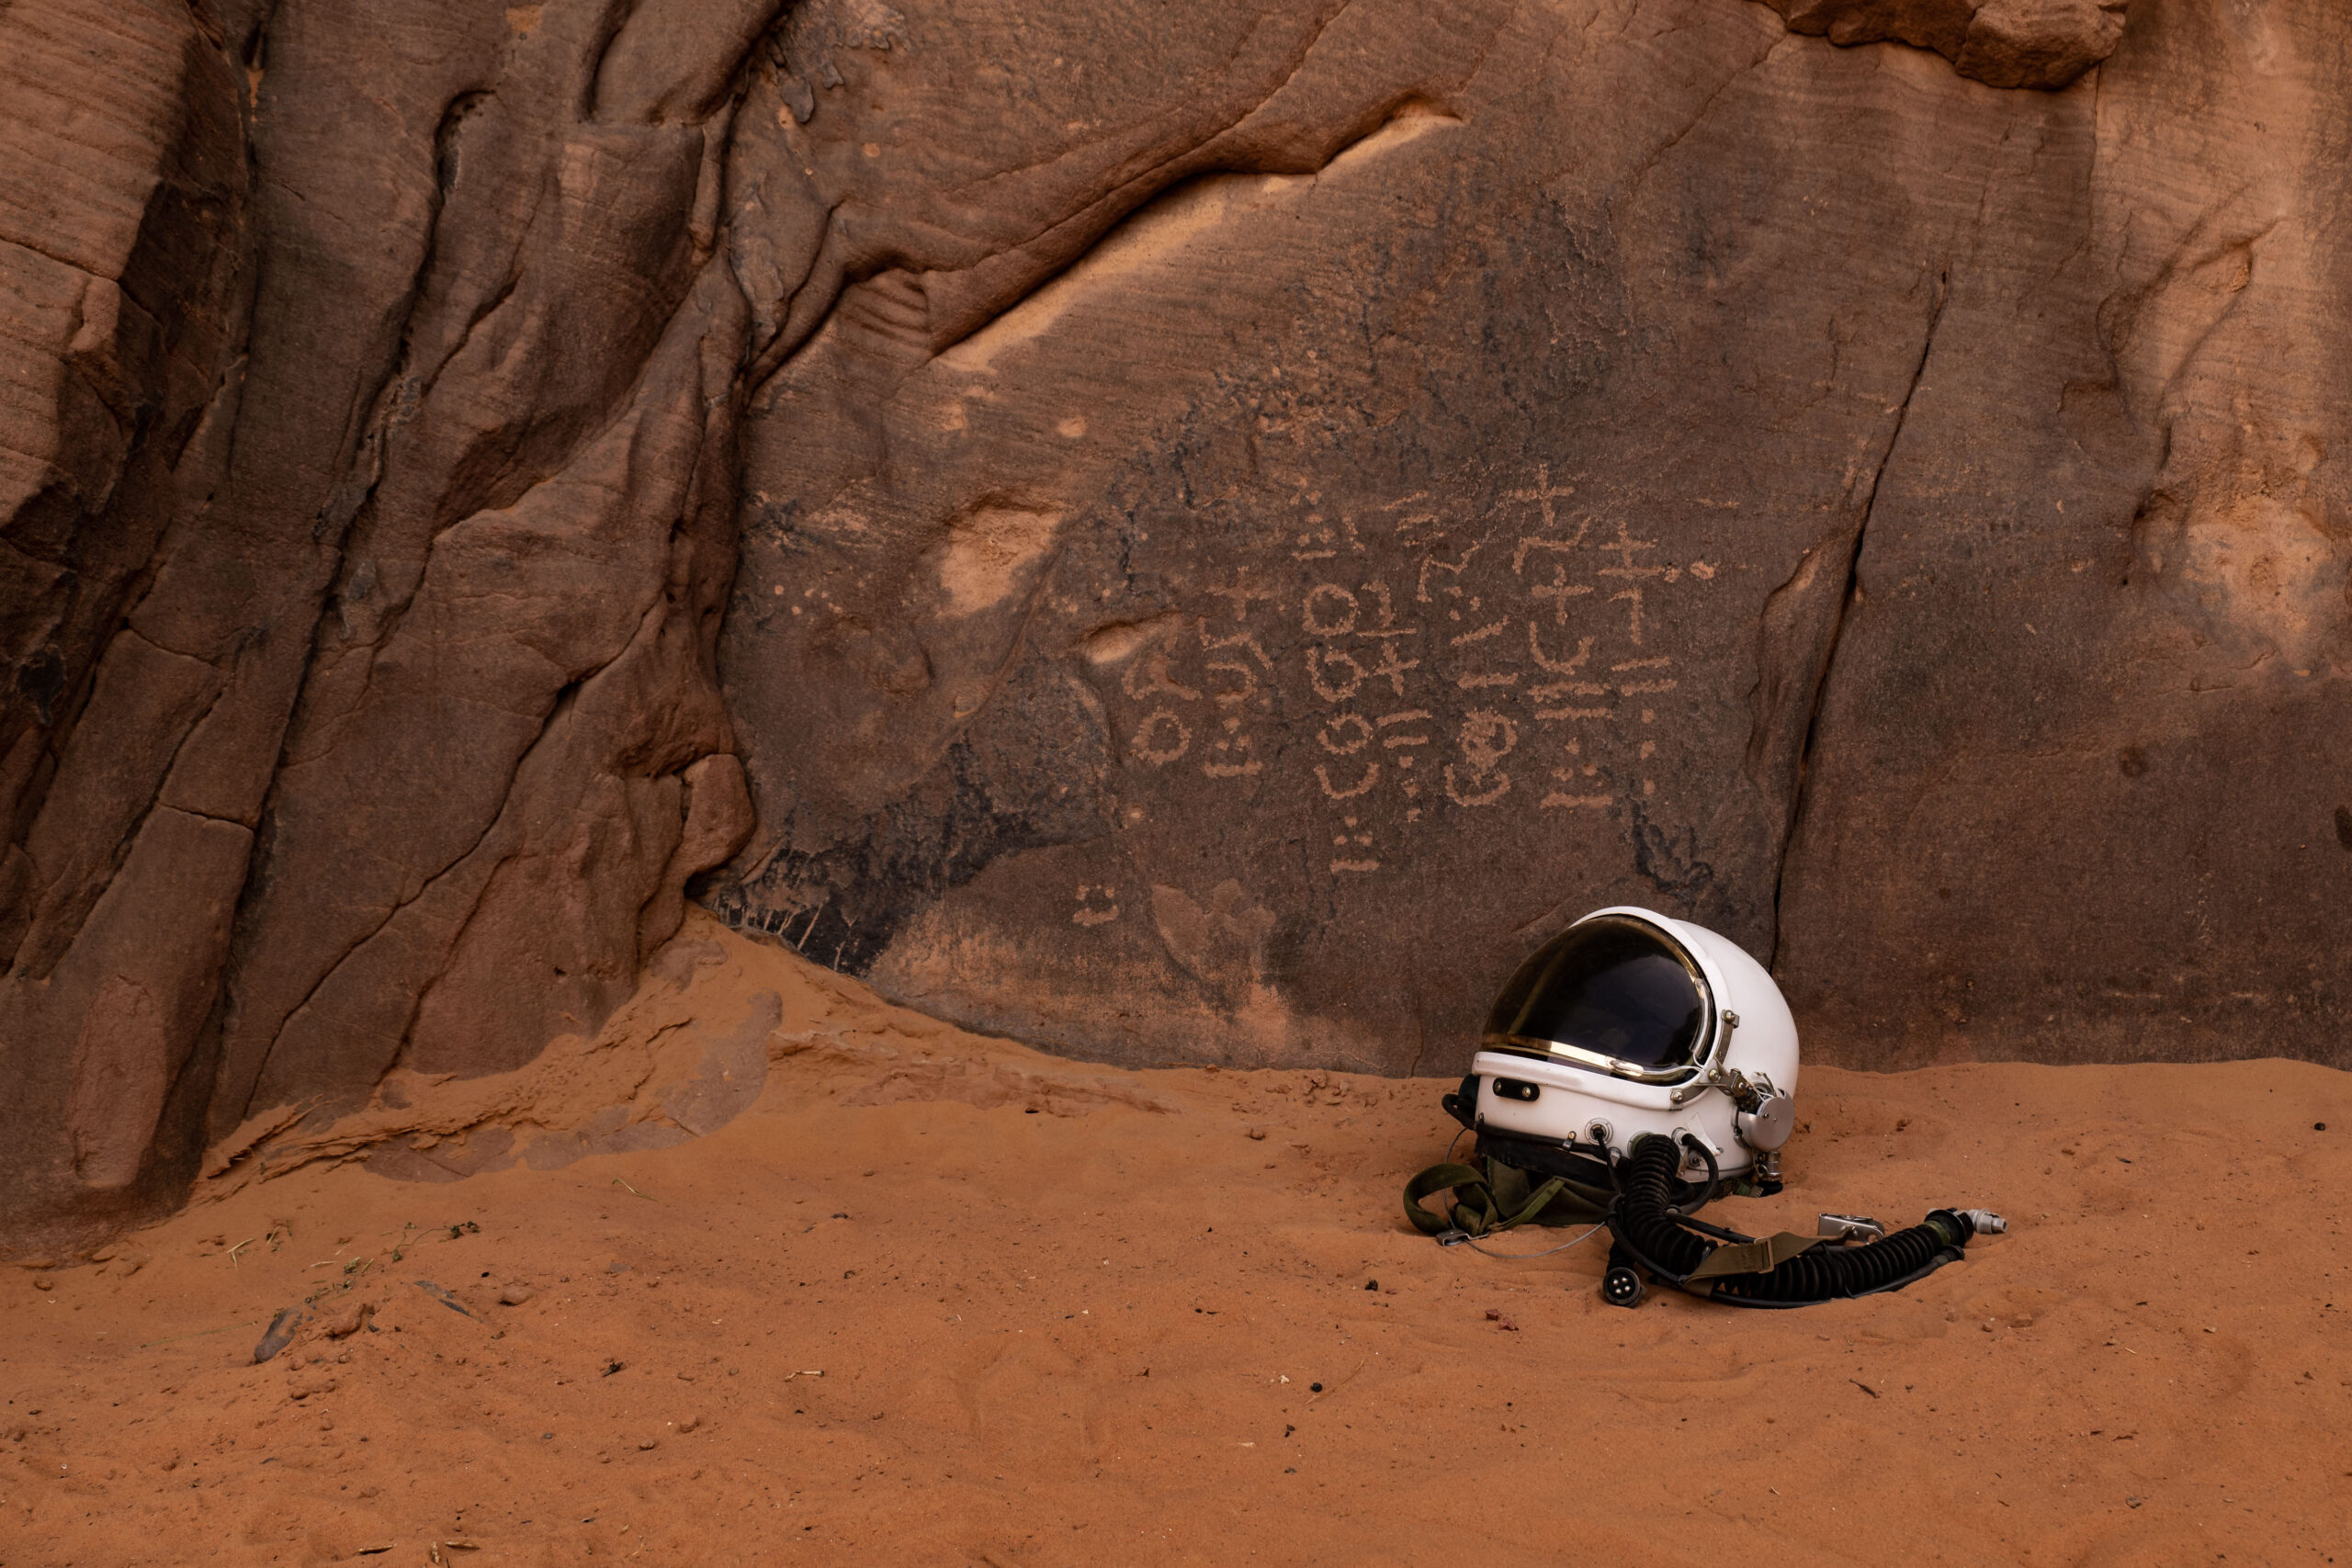 Astronaut helmet from 'Space to Roam' laying next to ancient engravings from over 3,000 years ago in Algeria